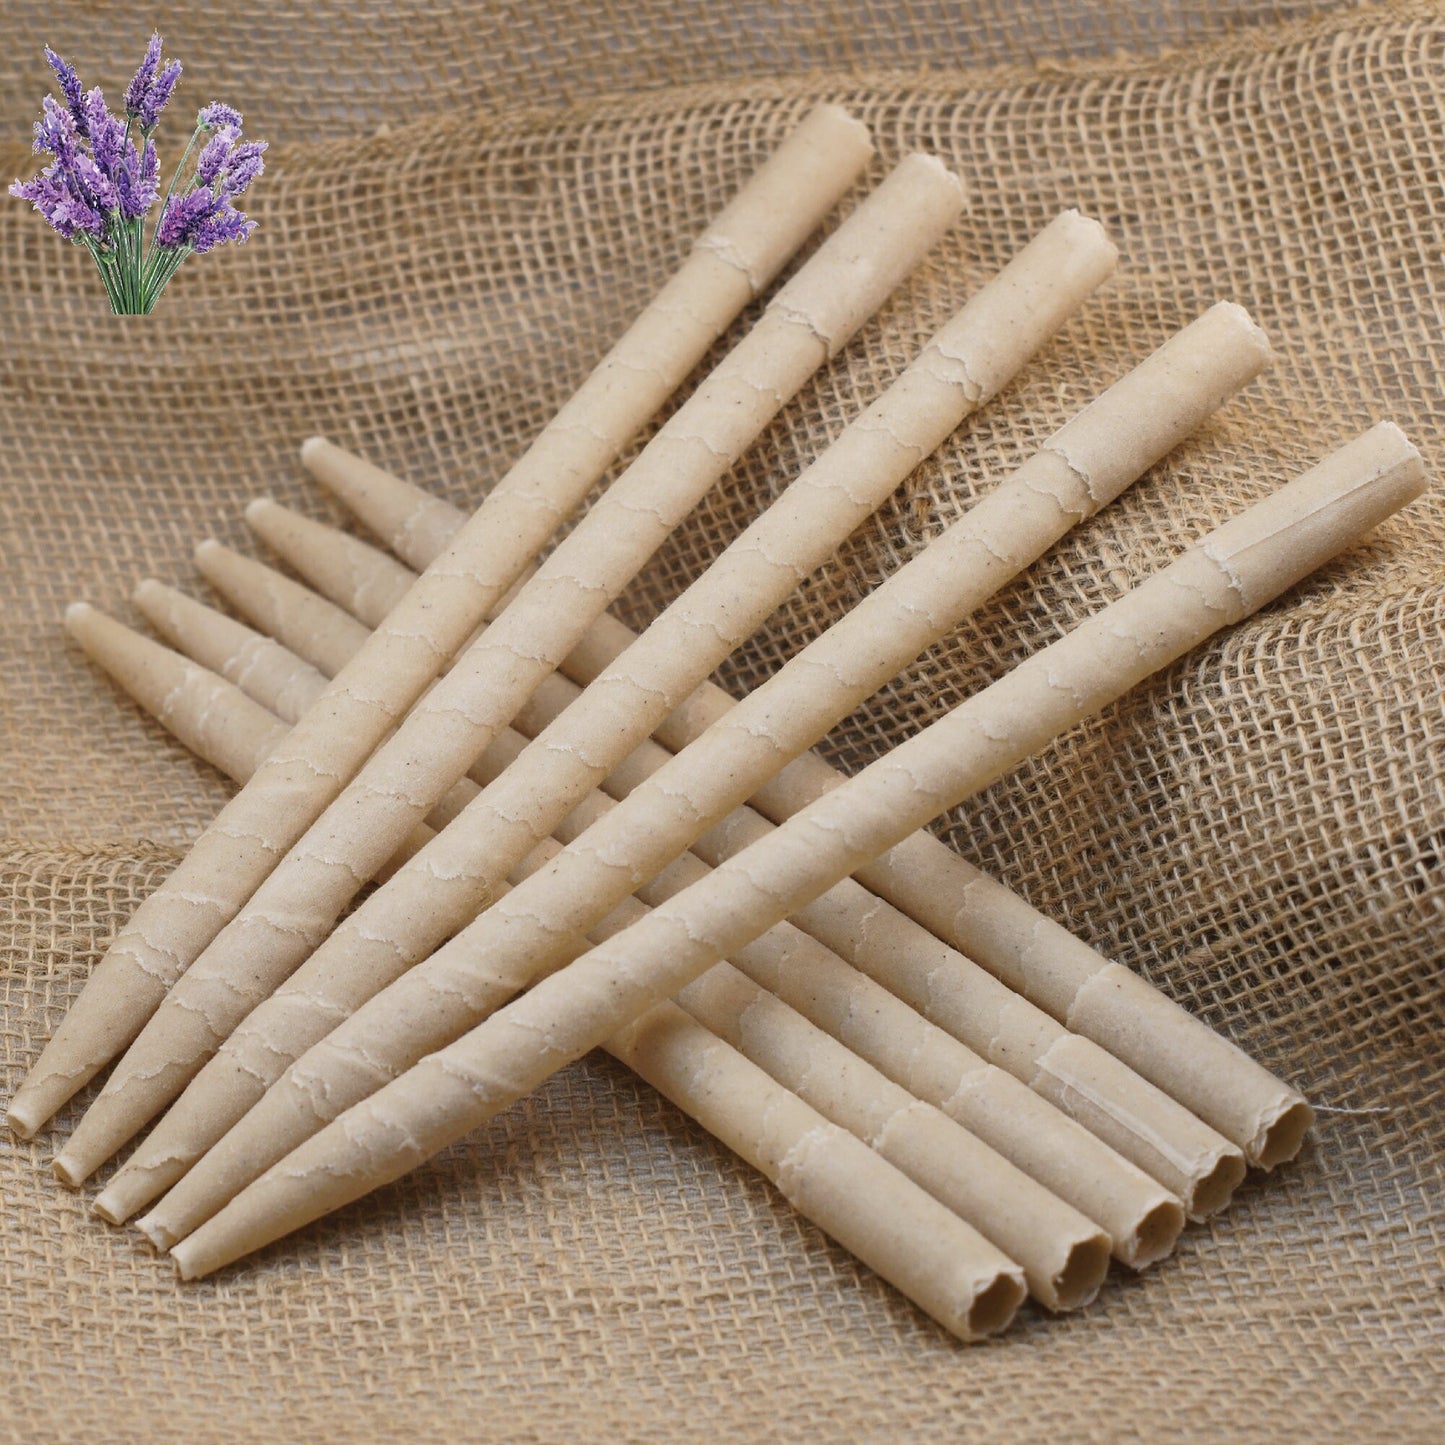 Ear Candles 10pk Infused with Lavender Essential Oils - Made in the USA